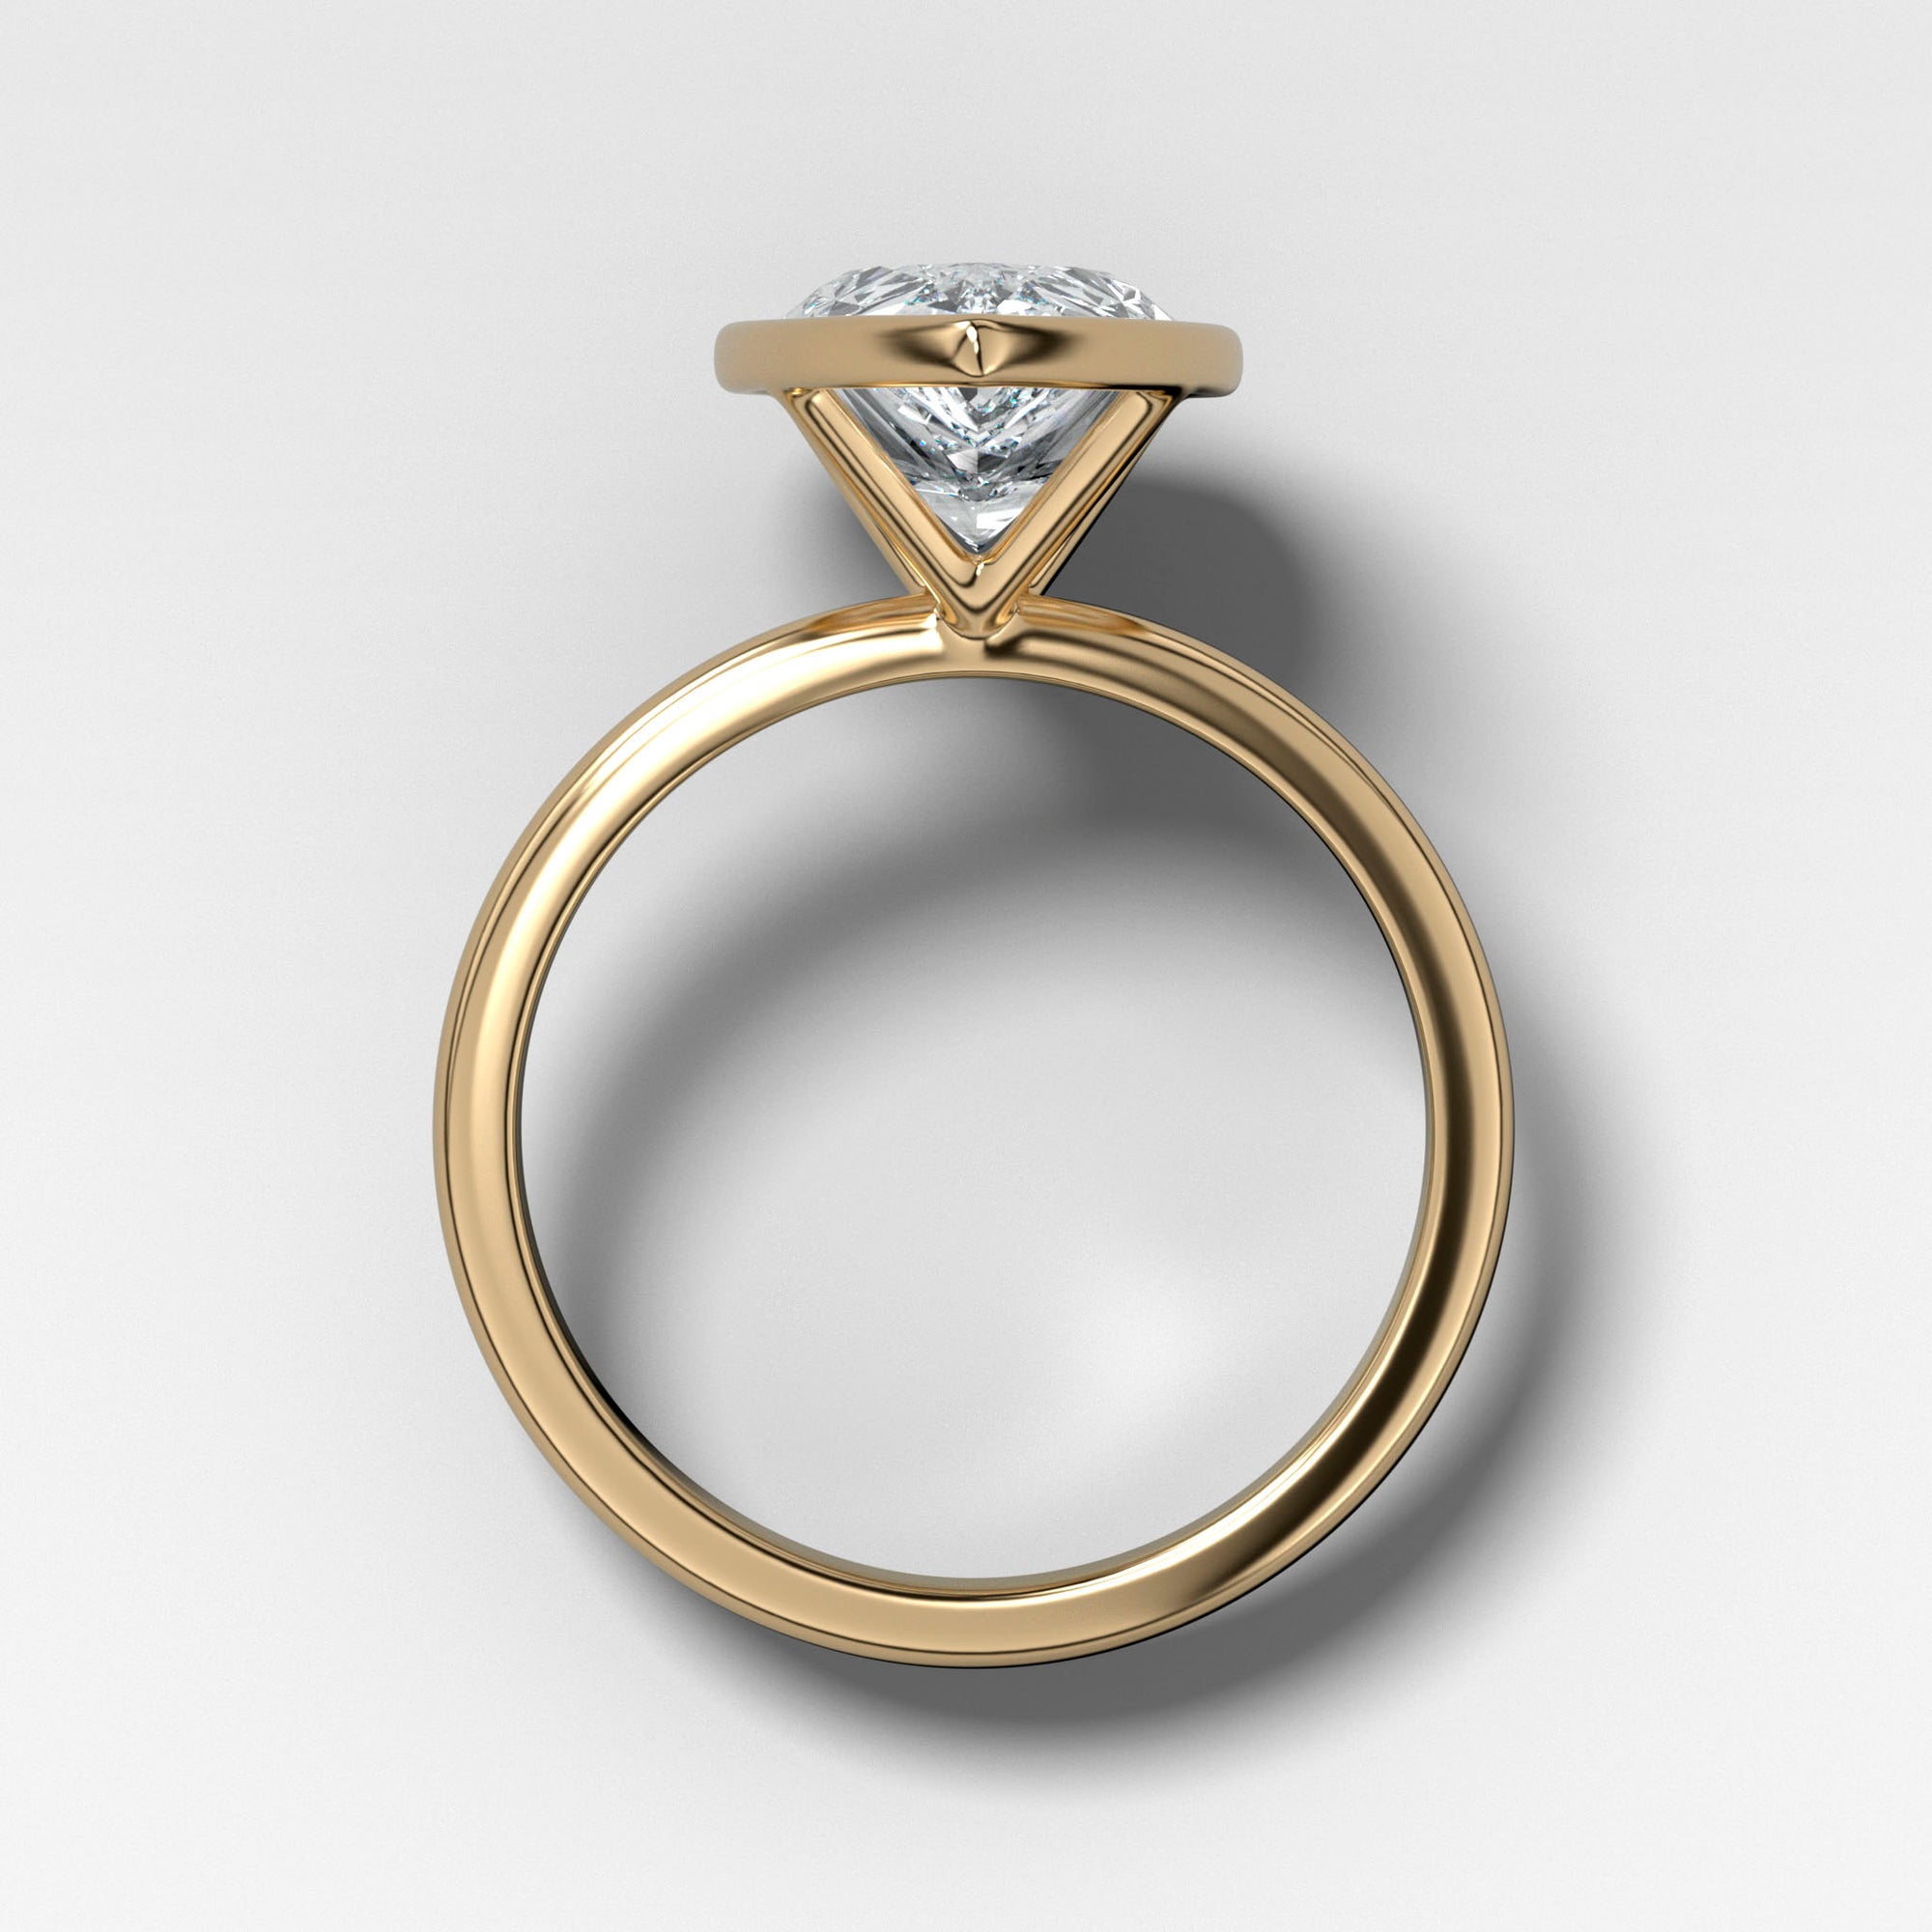 Bezel Penumbra Solitaire With Pear Cut by Good Stone in Yellow Gold